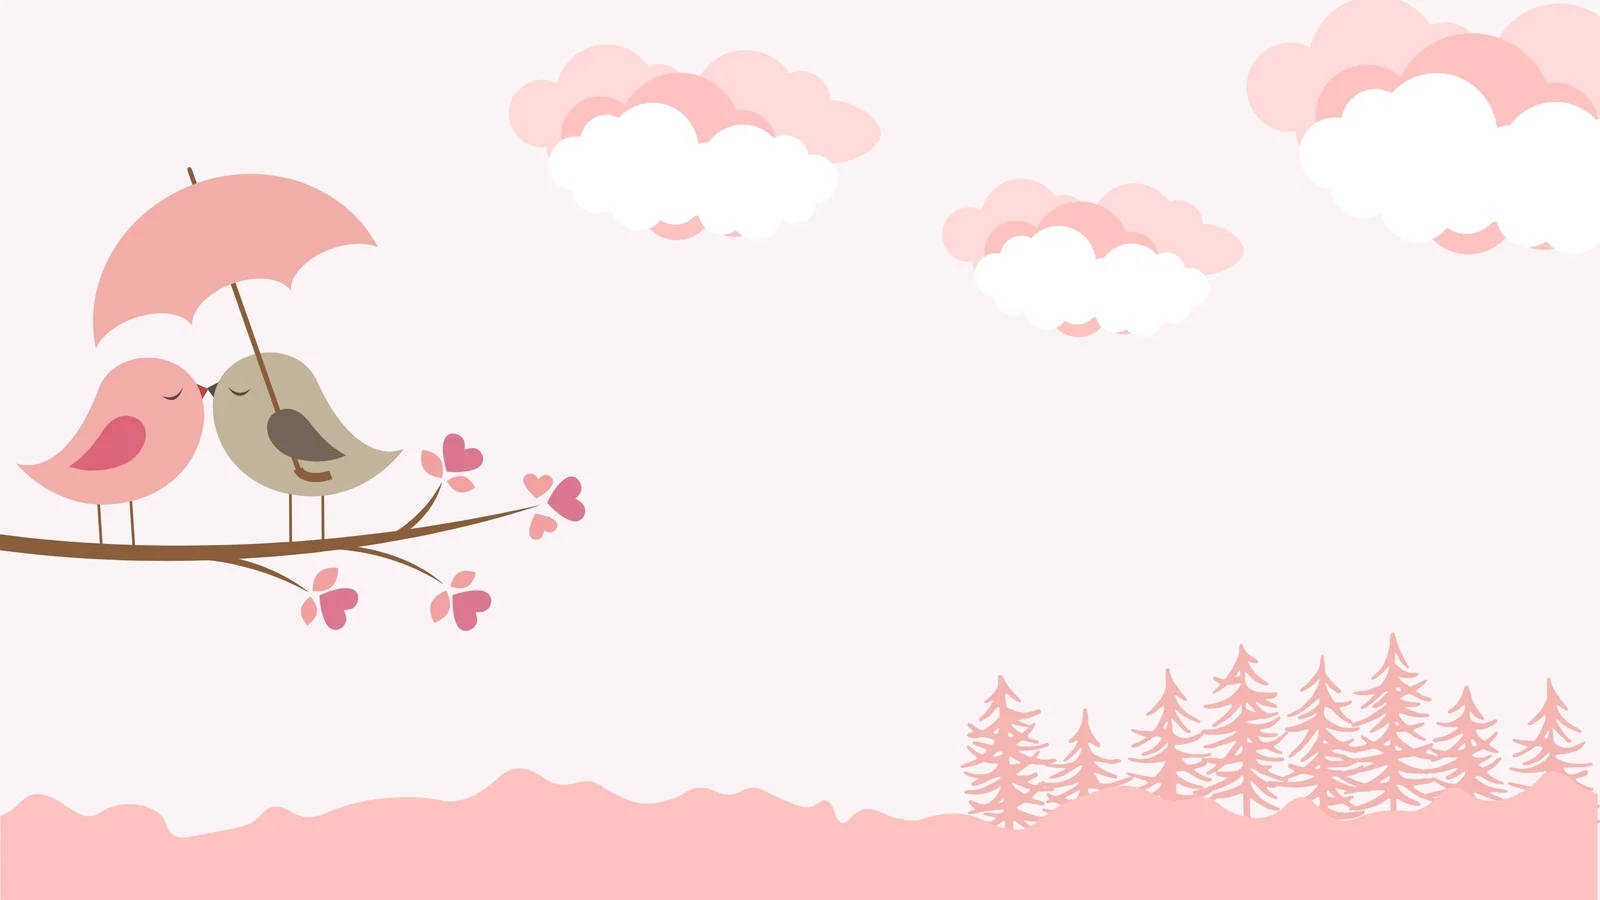 Love Birds In Front Of Pink Forest